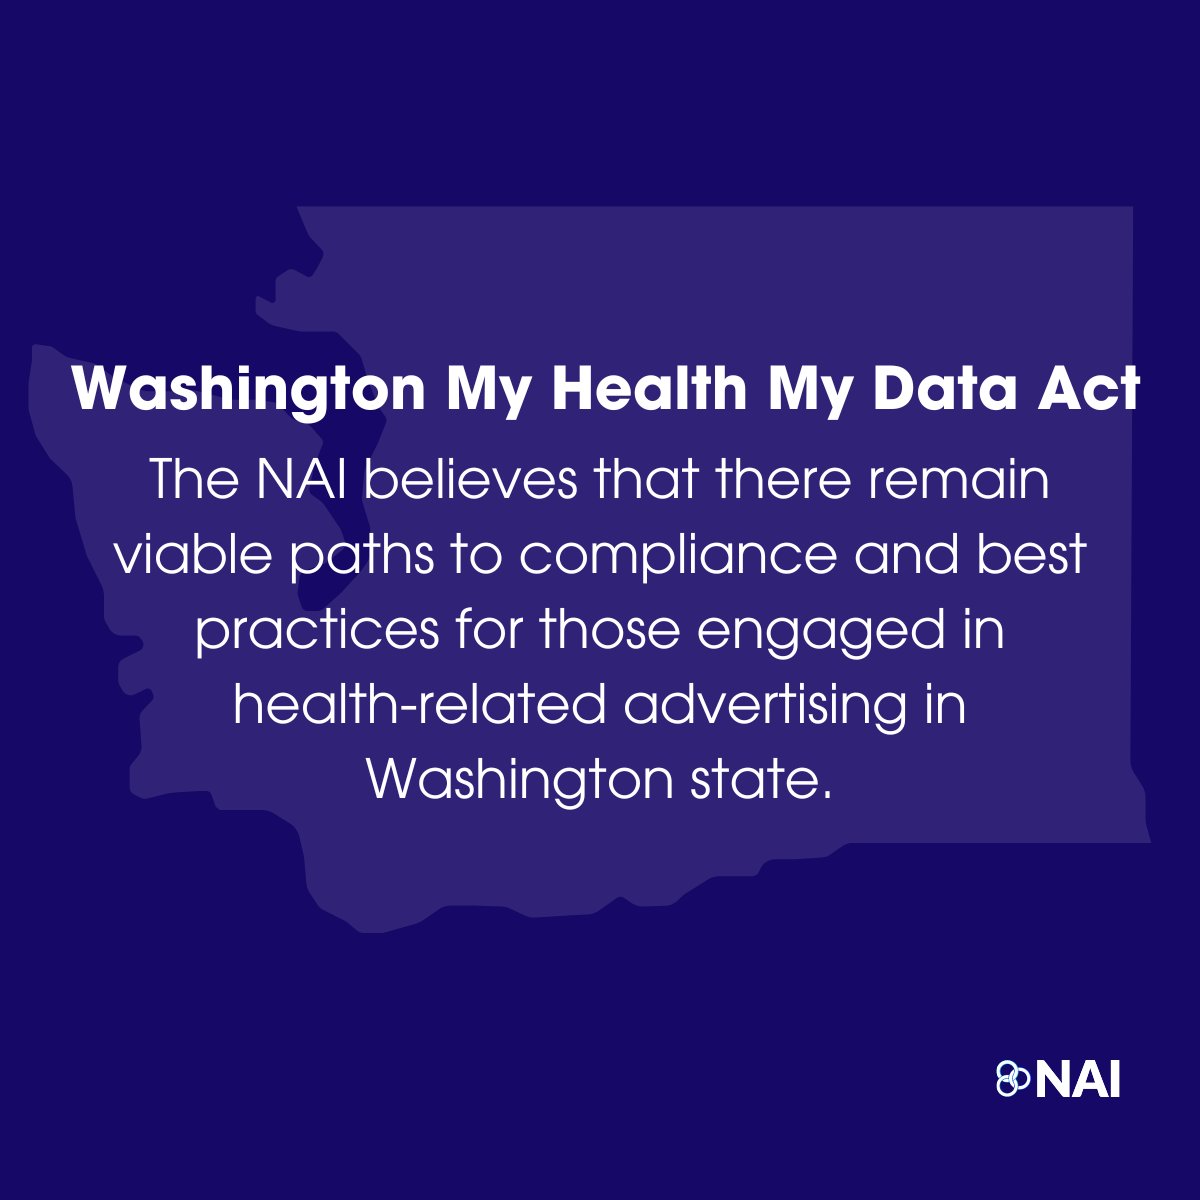 On March 31st, Washington’s My Health My Data Act (“MHMD”) came into force for covered entities, marking a new era in privacy compliance for companies directly engaged in health-related advertising and for the ad-tech ecosystem more broadly. Learn more: bit.ly/3VQXM9L